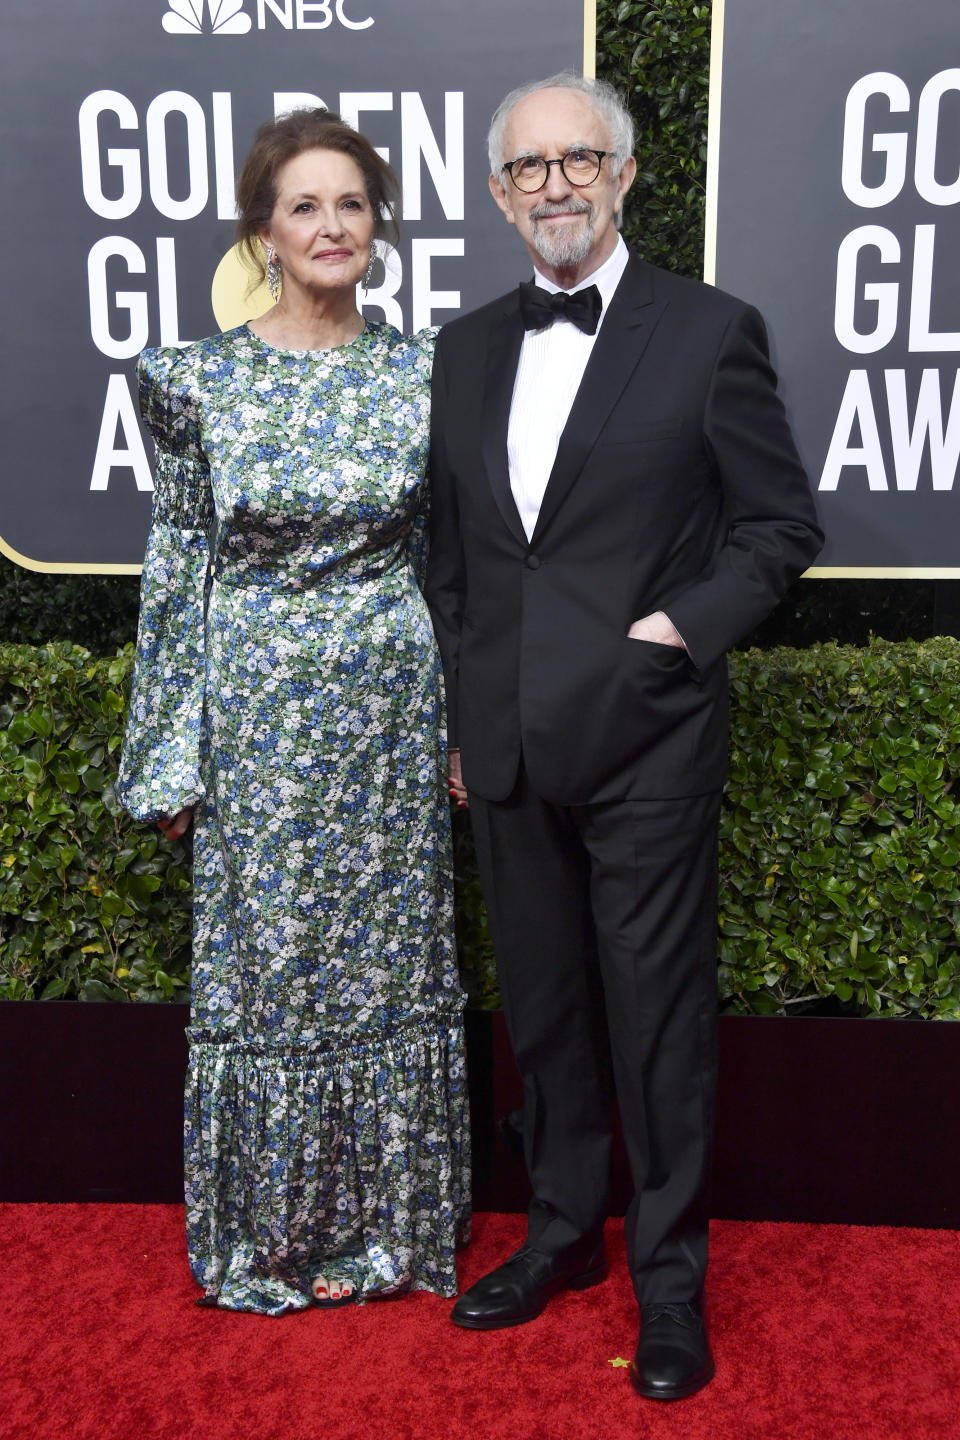 BEVERLY HILLS, CALIFORNIA - JANUARY 05: (L-R) Kate Fahy and Jonathan Pryce attend the 77th Annual Golden Globe Awards at The Beverly Hilton Hotel on January 05, 2020 in Beverly Hills, California. (Photo by Frazer Harrison/Getty Images)